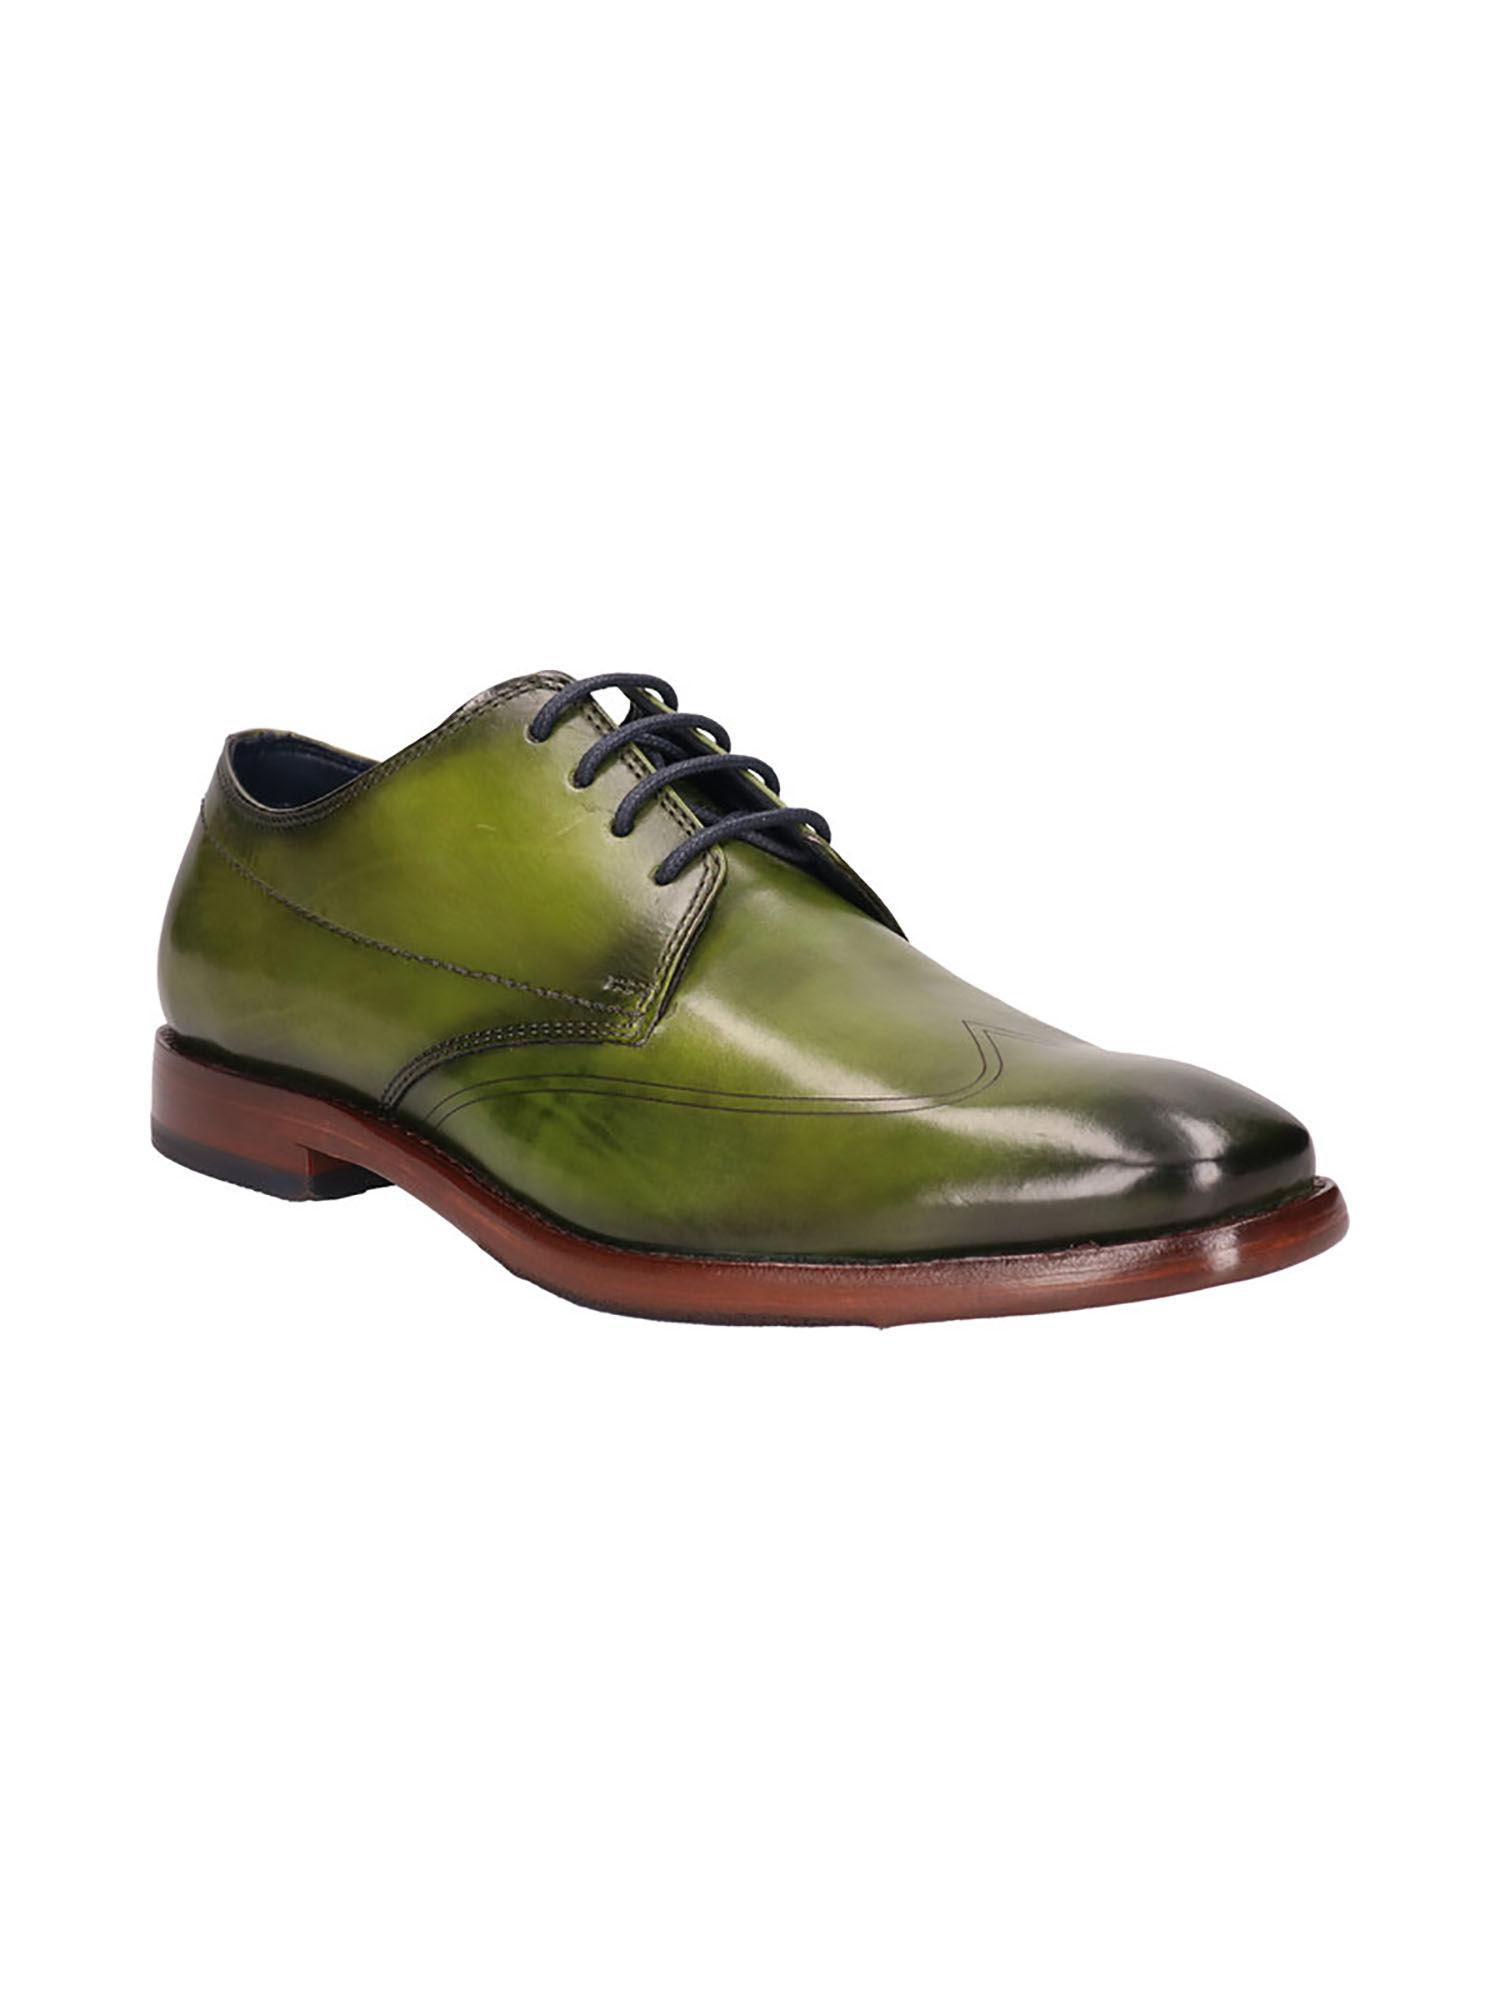 mansaro green leather mens derby shoes